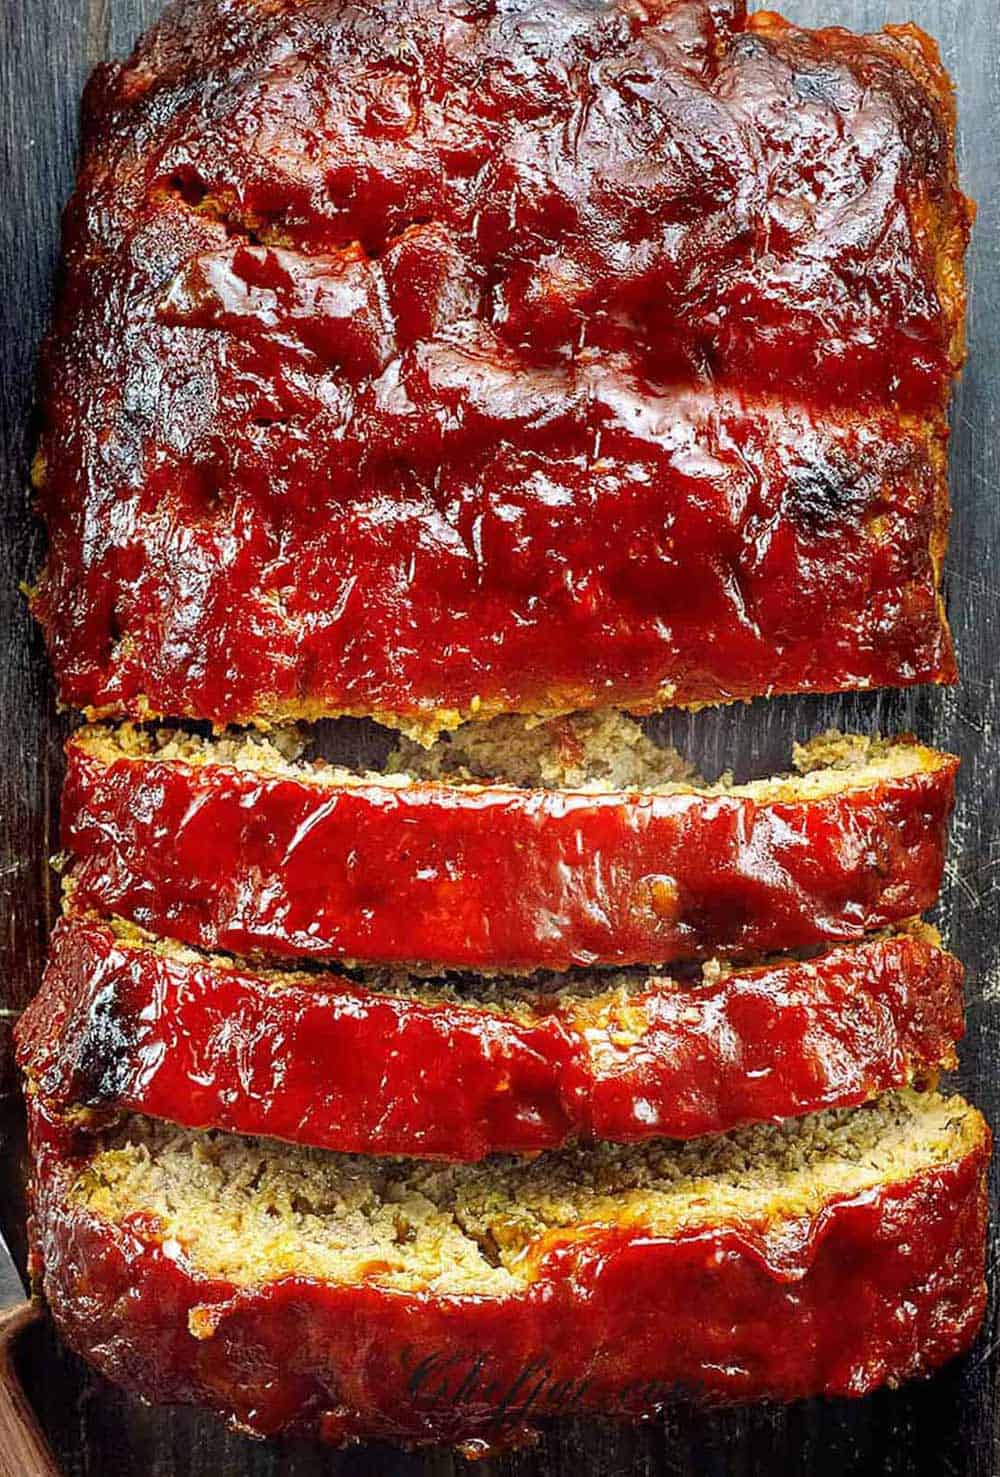 A sliced meatloaf on the wooden cutting board.